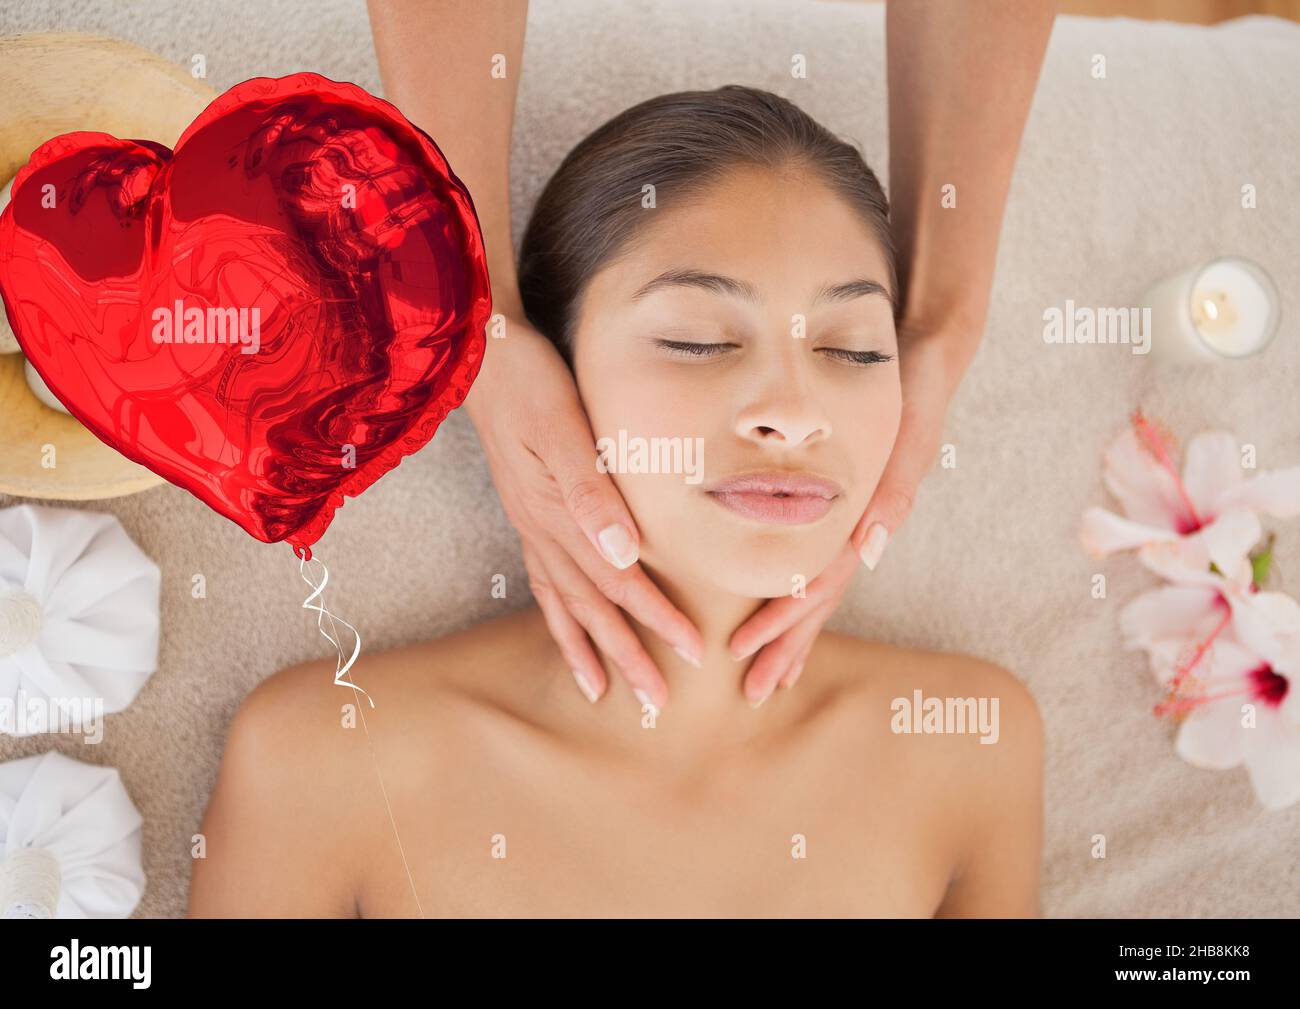 Composite image of red heart shaped foil balloon against woman receiving a neck massage at a spa Stock Photo